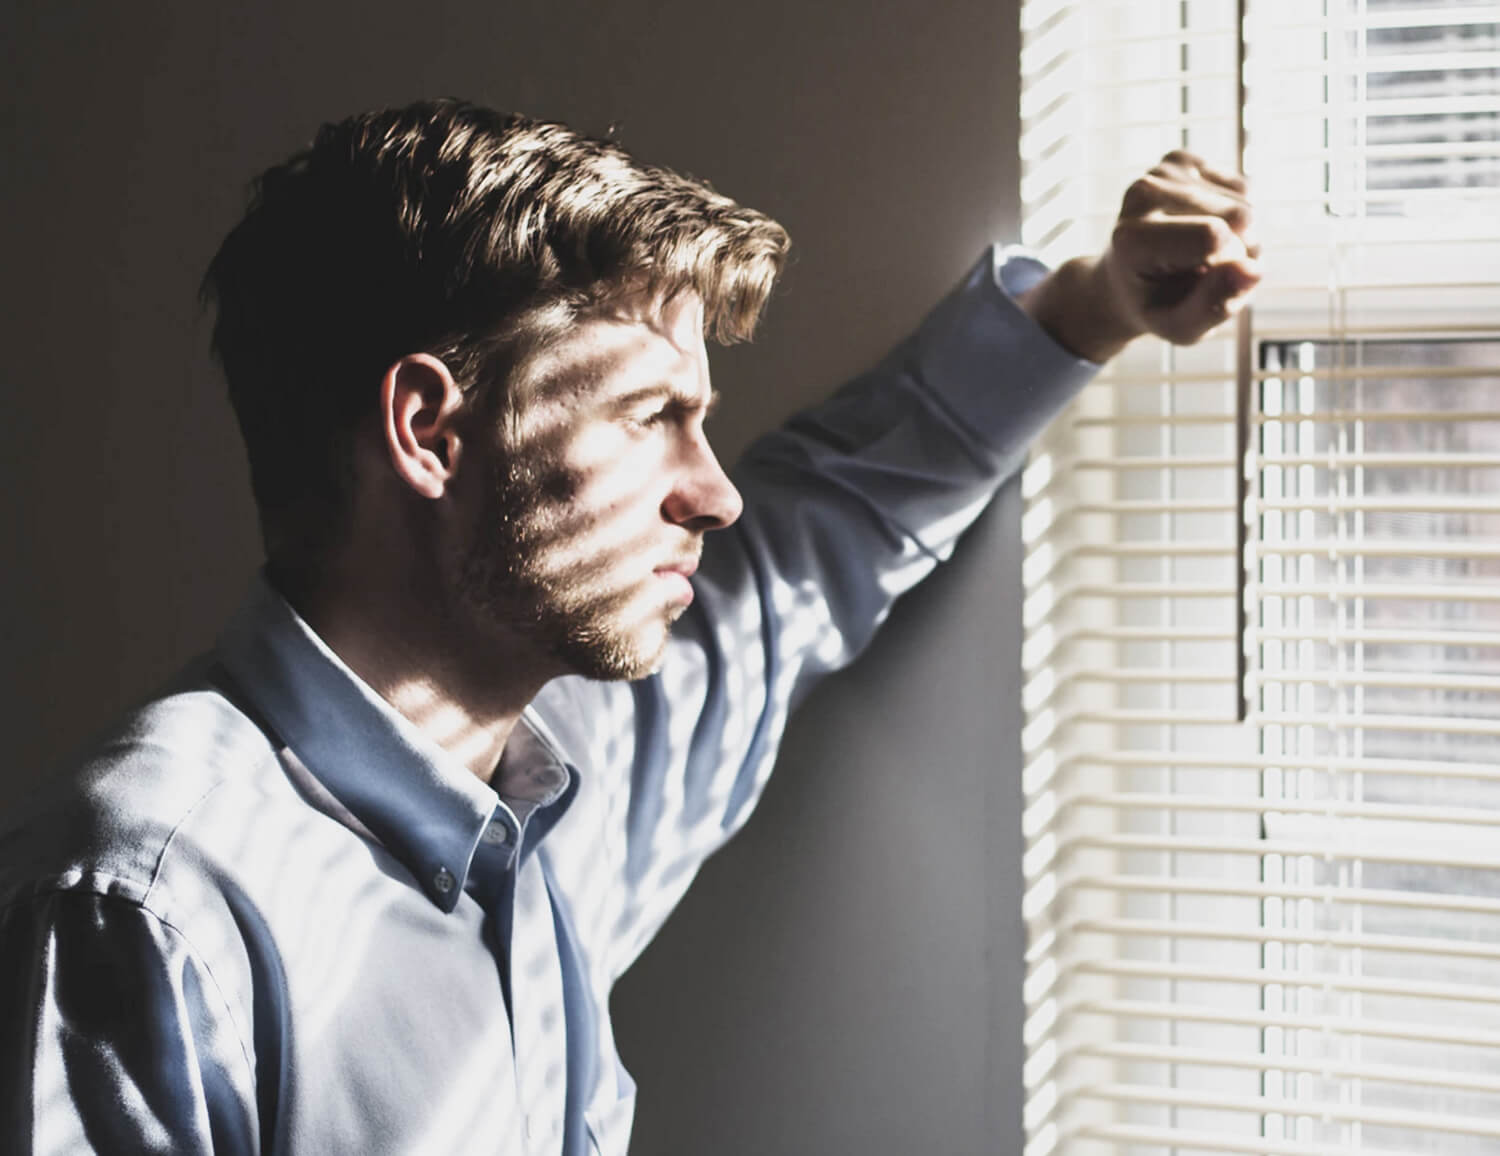 man looking out of window